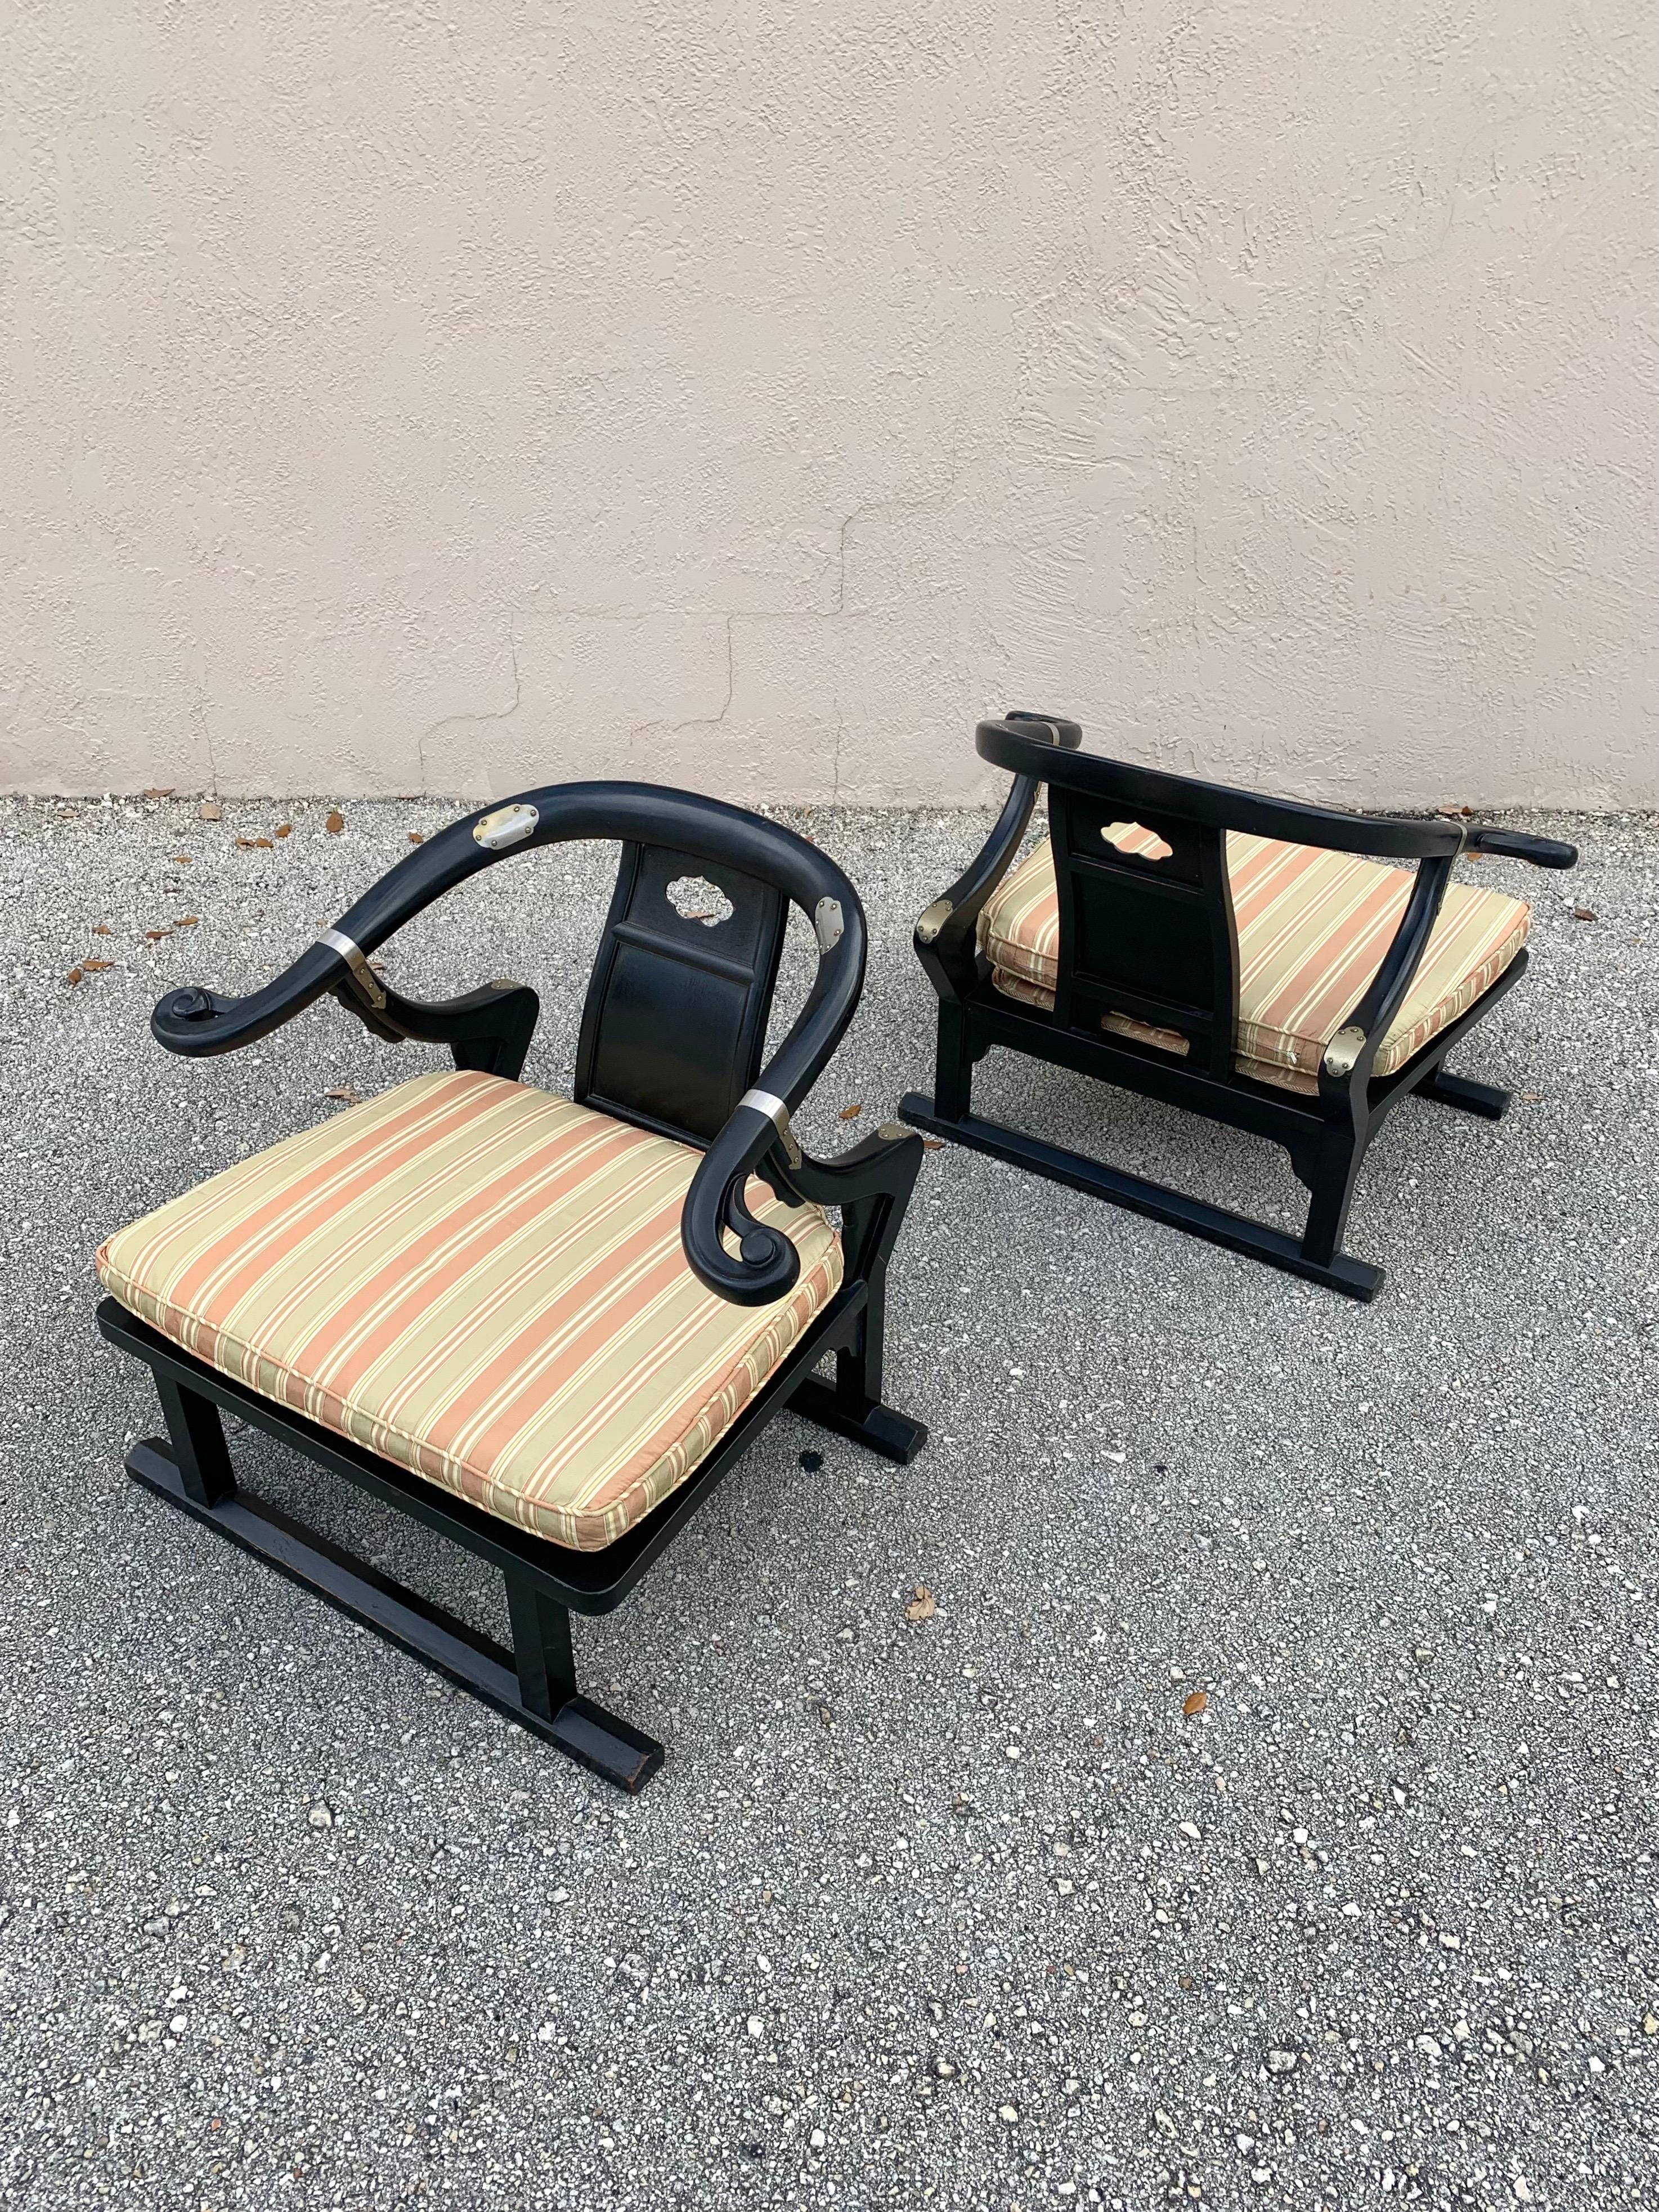 Pair of lounge chairs designed by Michael Taylor. From his Far East collection for Baker Furniture. Model 2510. 

Lacquered walnut frames with steel accents. Horseshoe back with a sled base. Wonderful patina from brass fading on accents and some